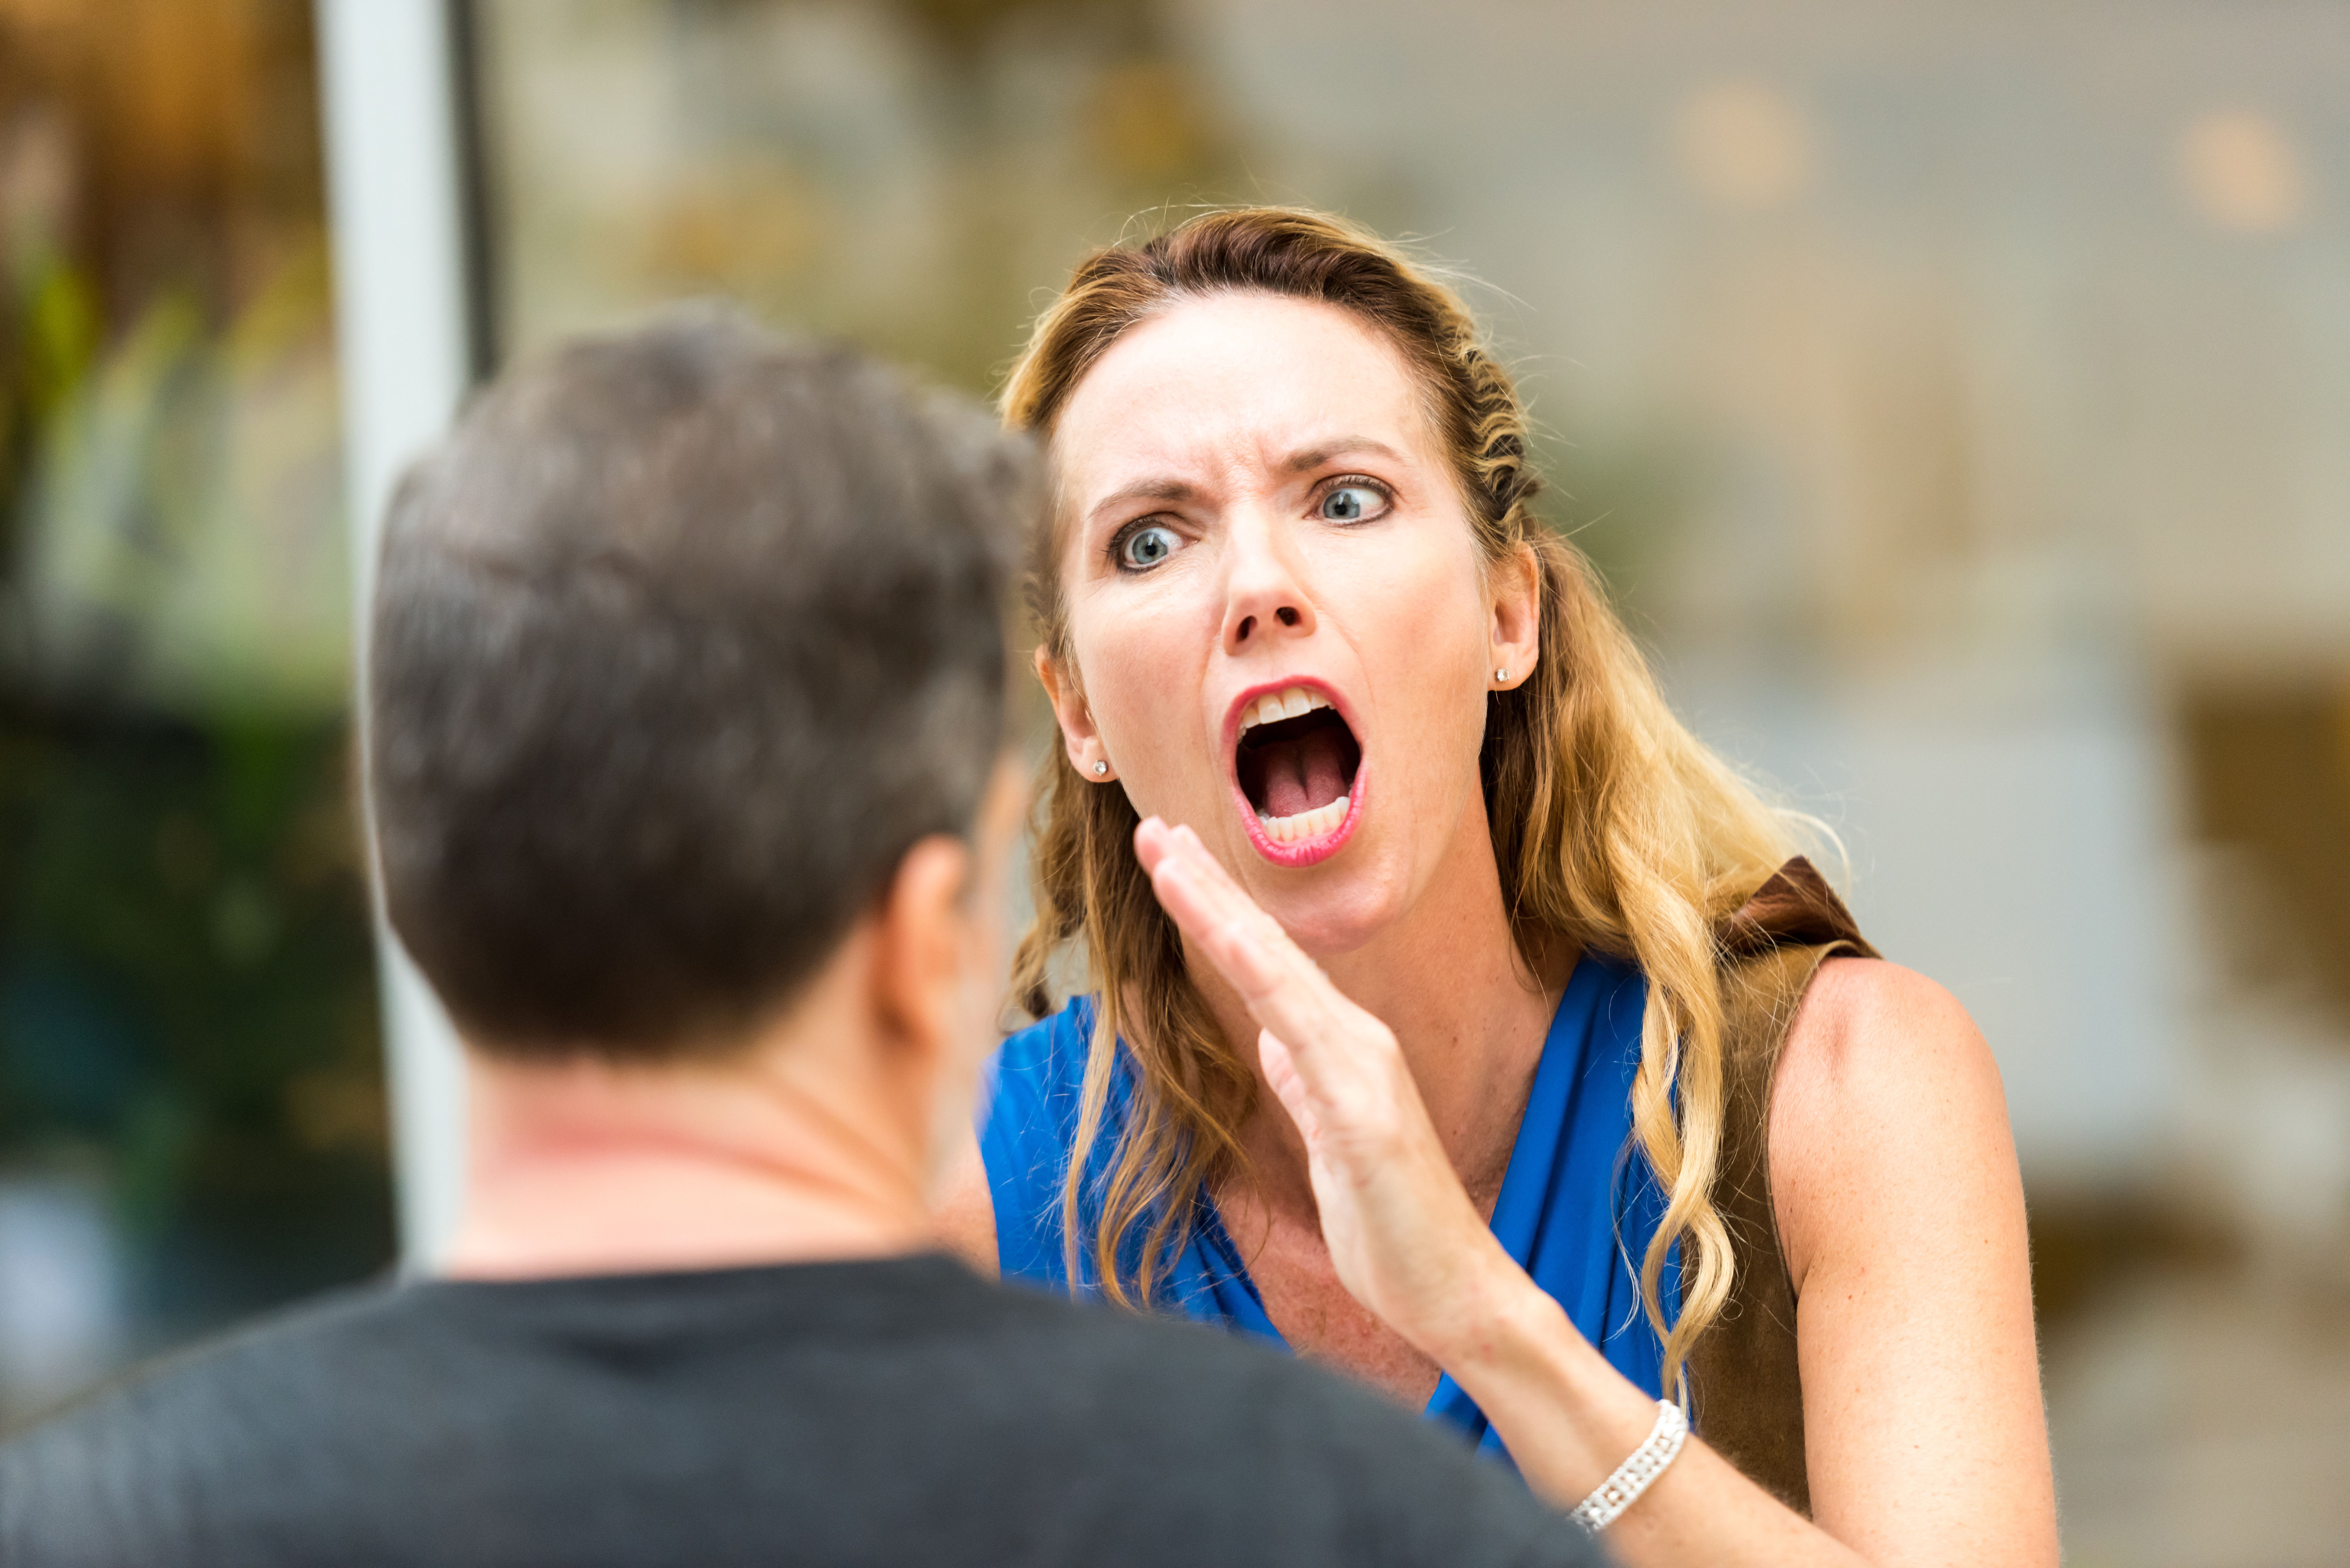 A woman yelling at a man. | Source: Getty Images